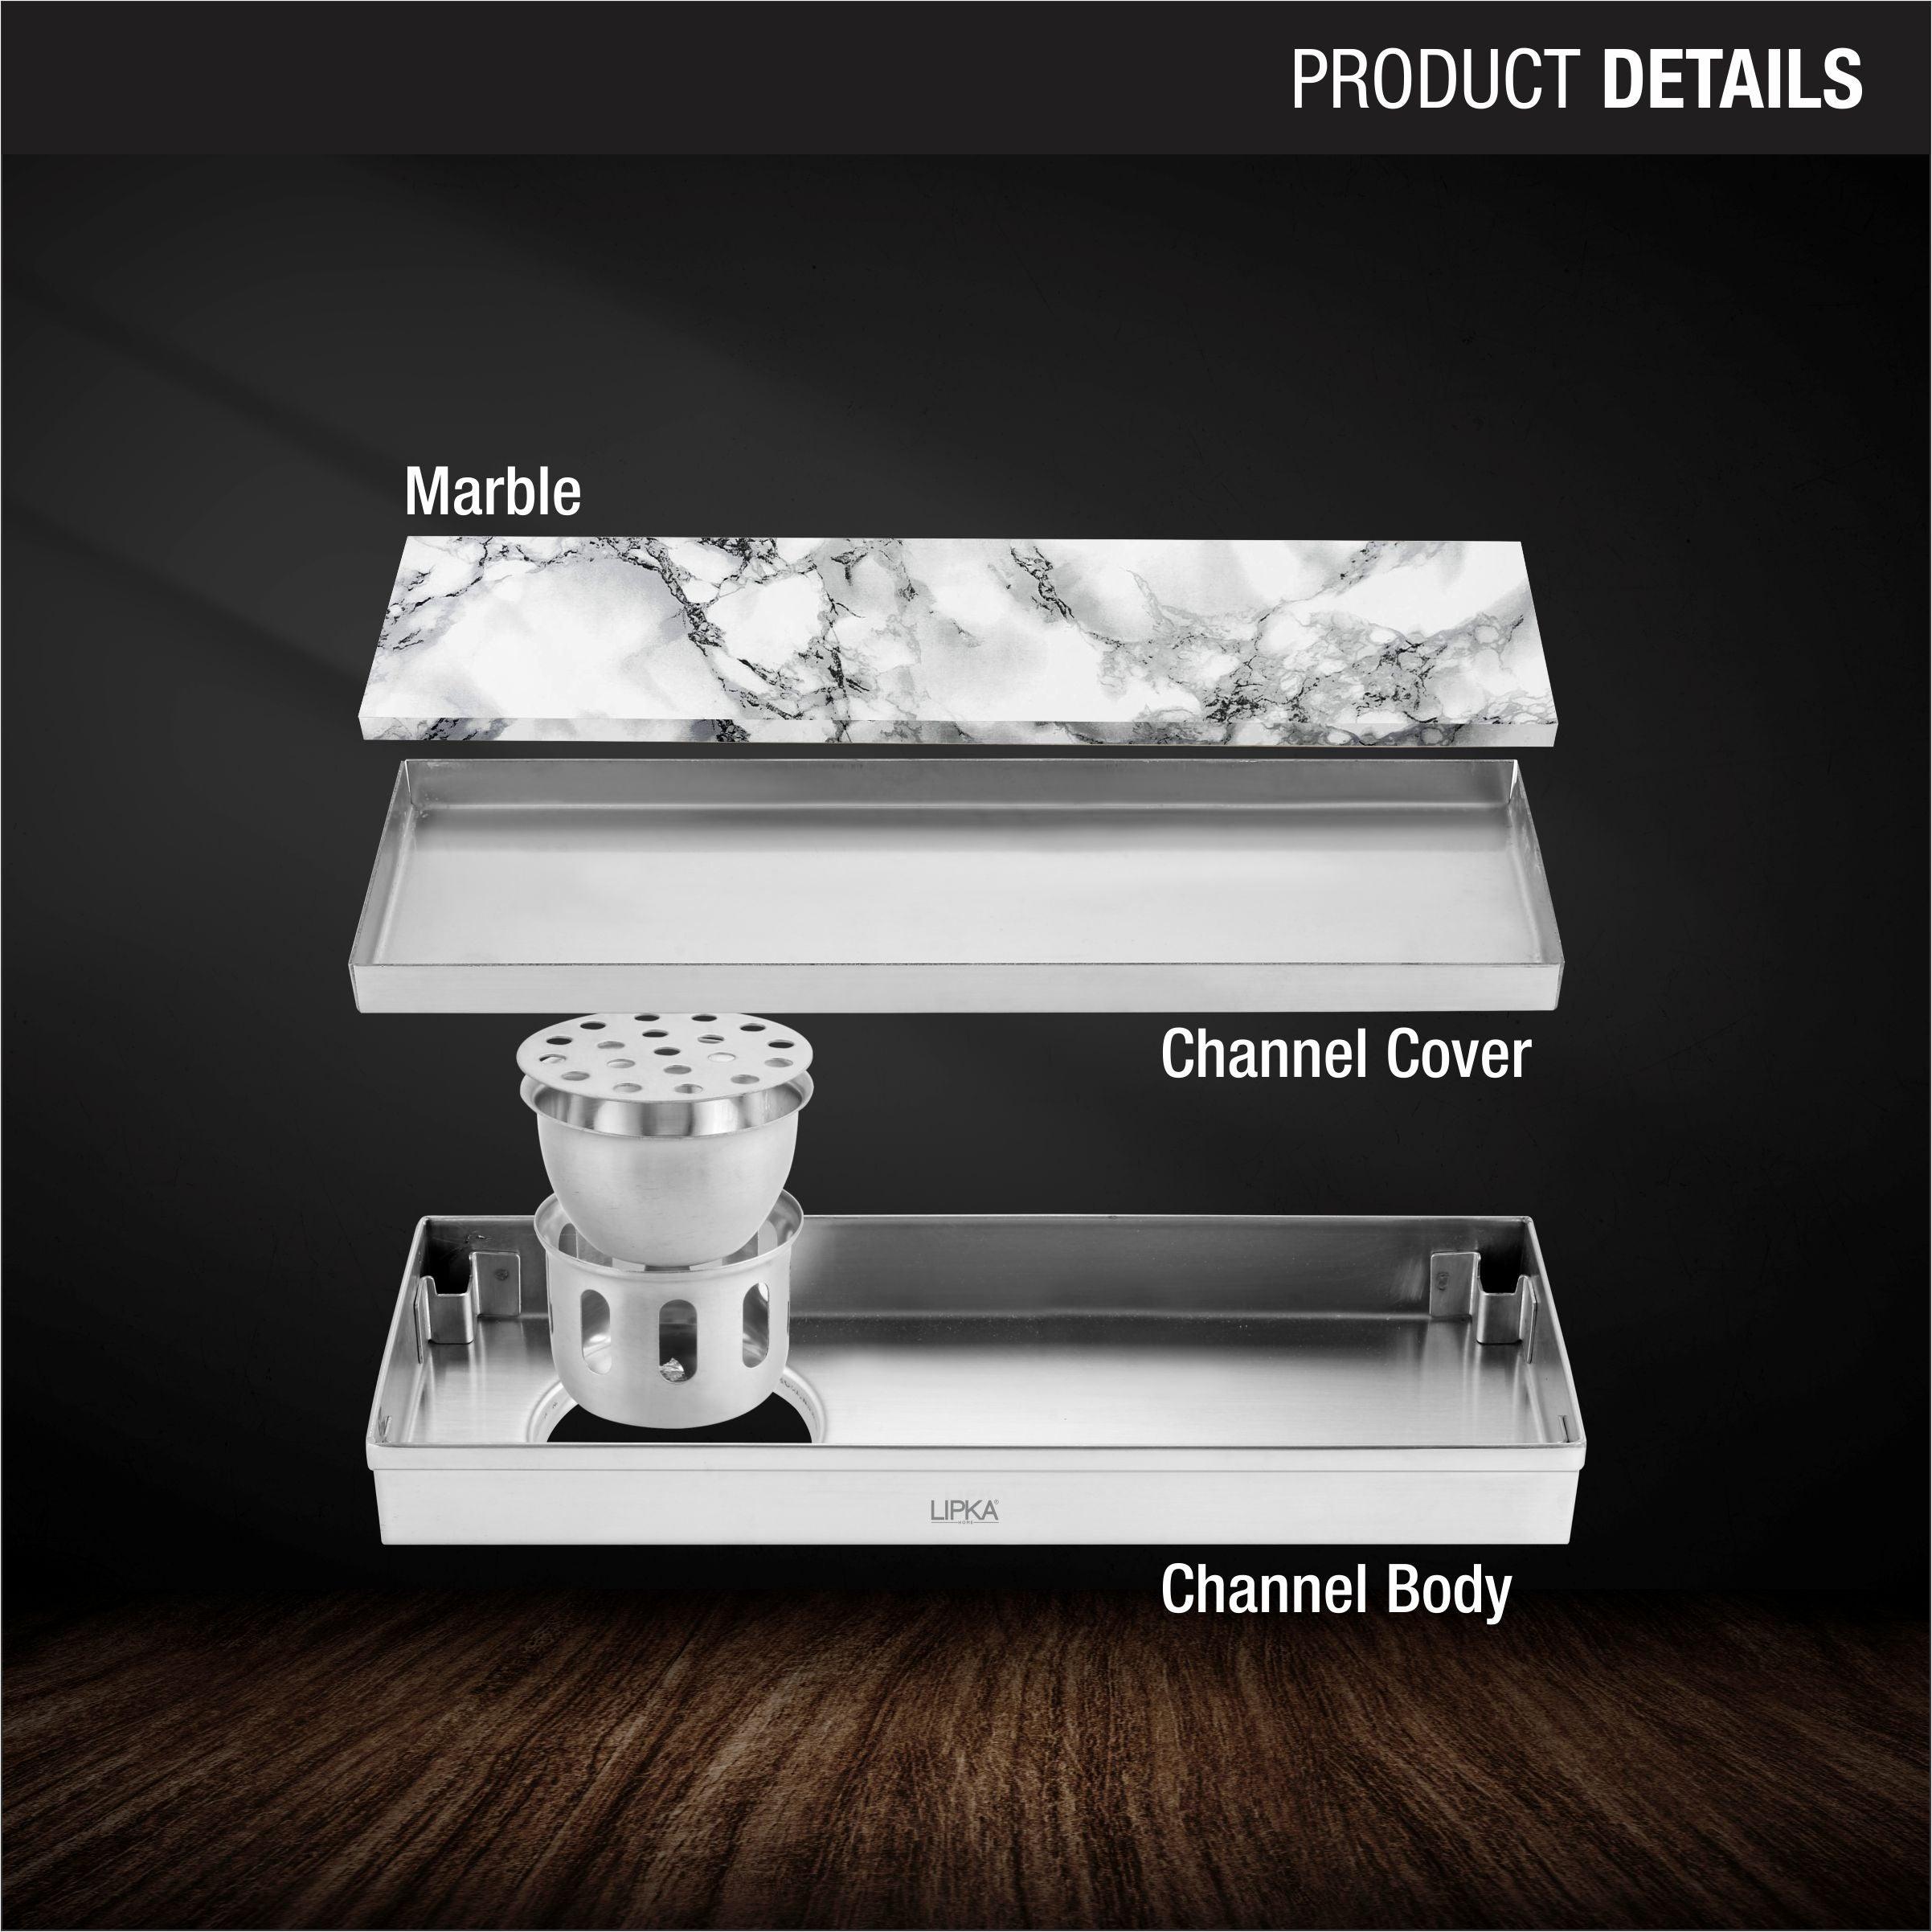 Marble Insert Shower Drain Channel (12 x 4 Inches) product details